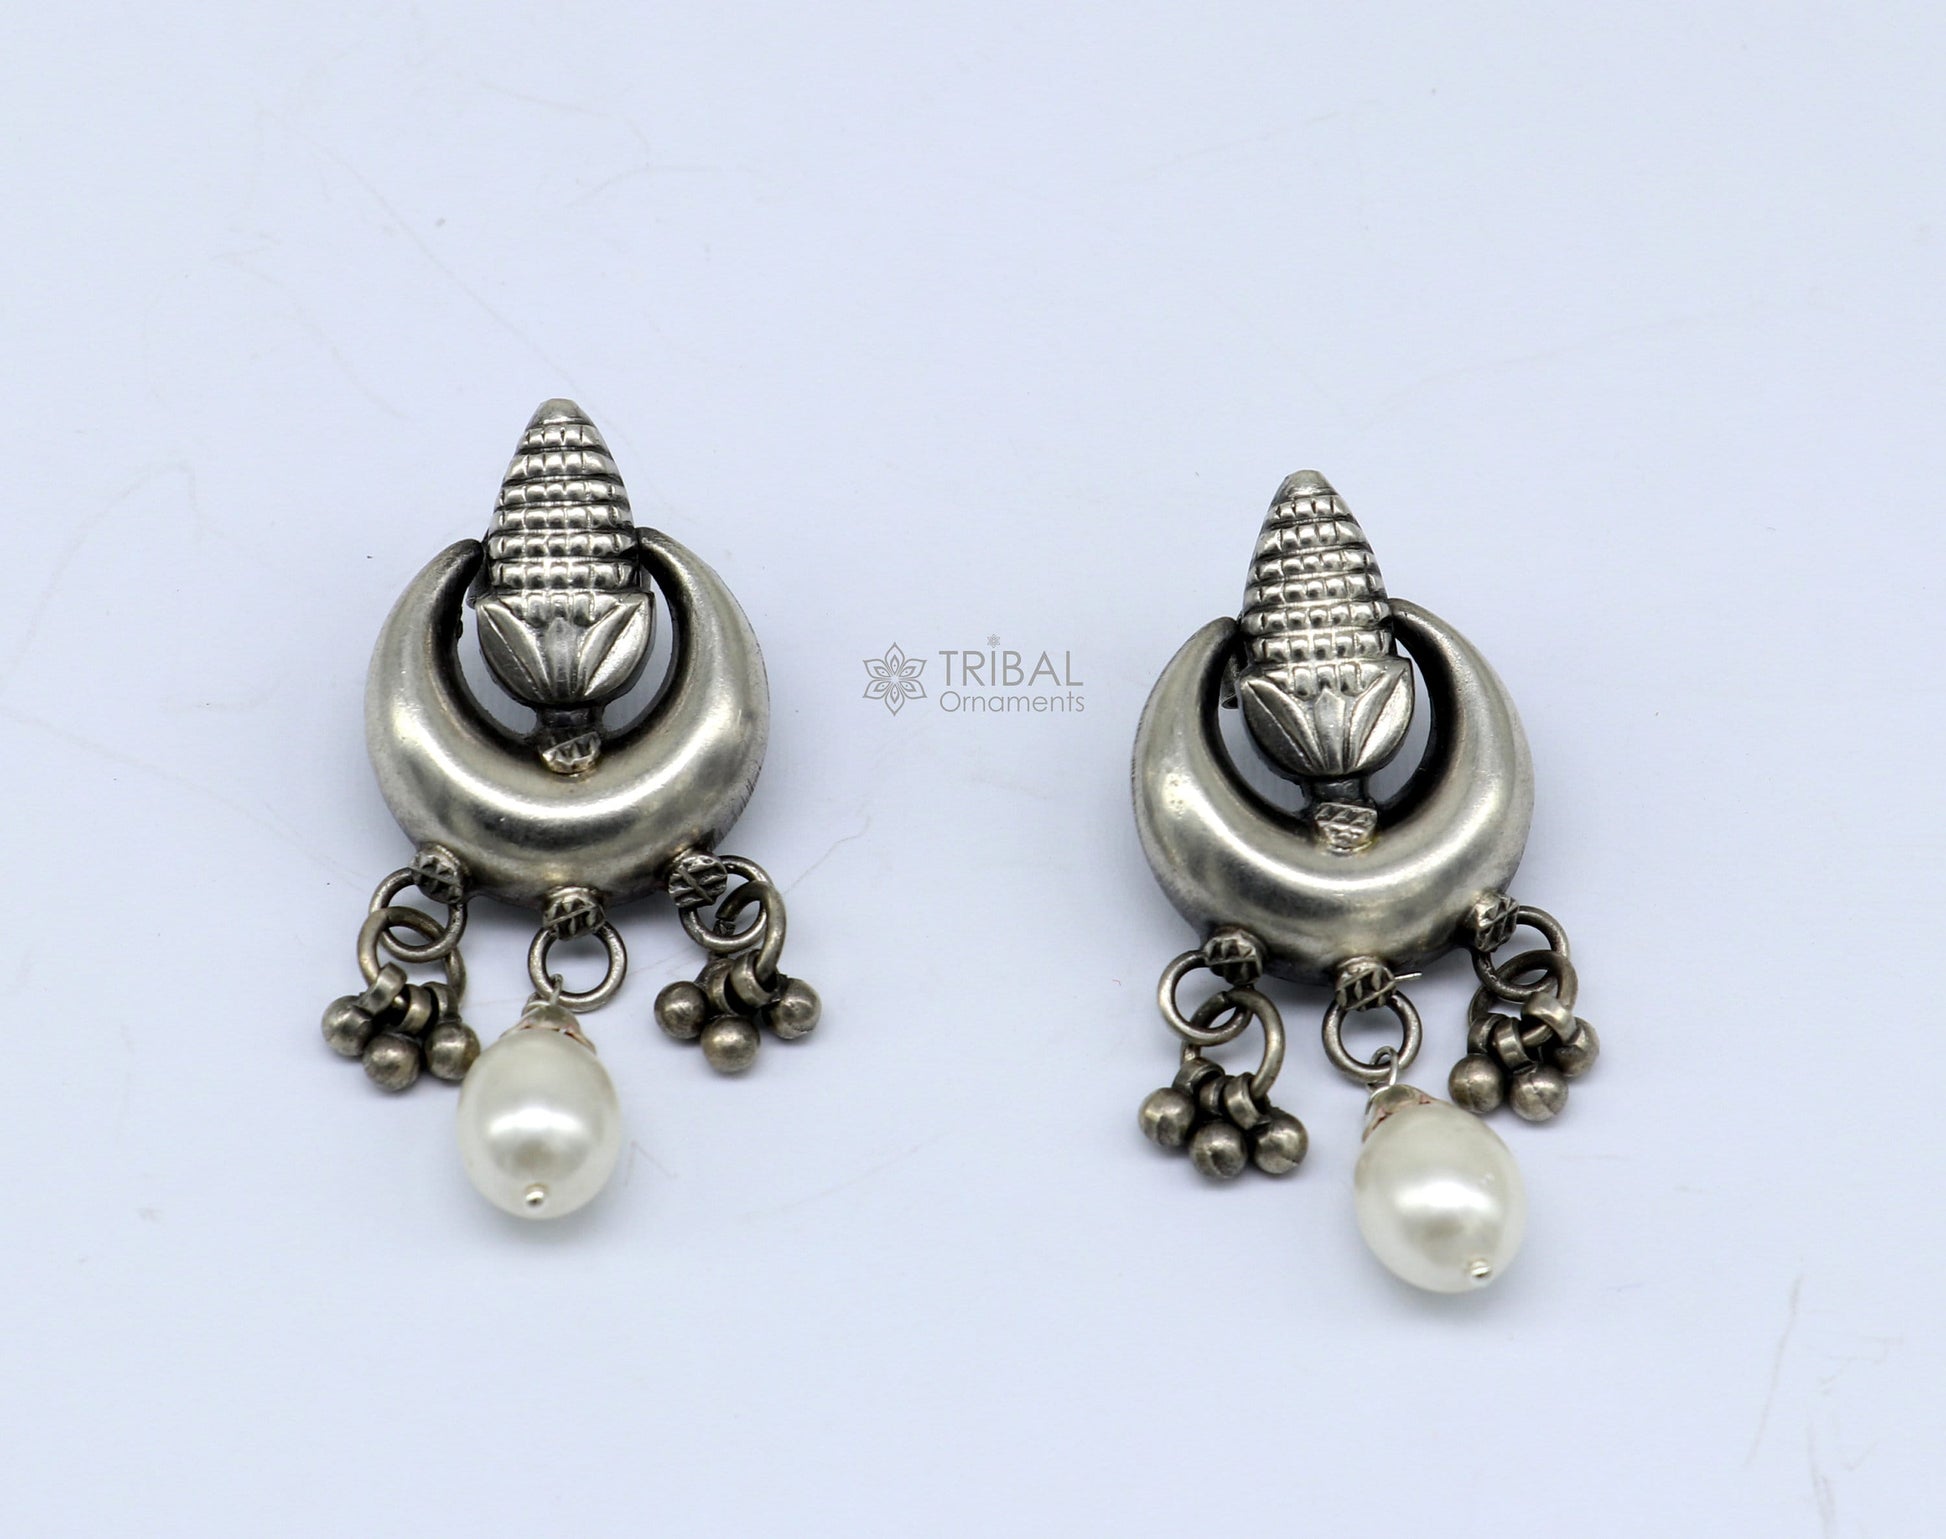 Traditional cultural trendy 925 sterling silver fabulous half moon style stud earrings with hanging pearl stud earring jewelry s1153 - TRIBAL ORNAMENTS